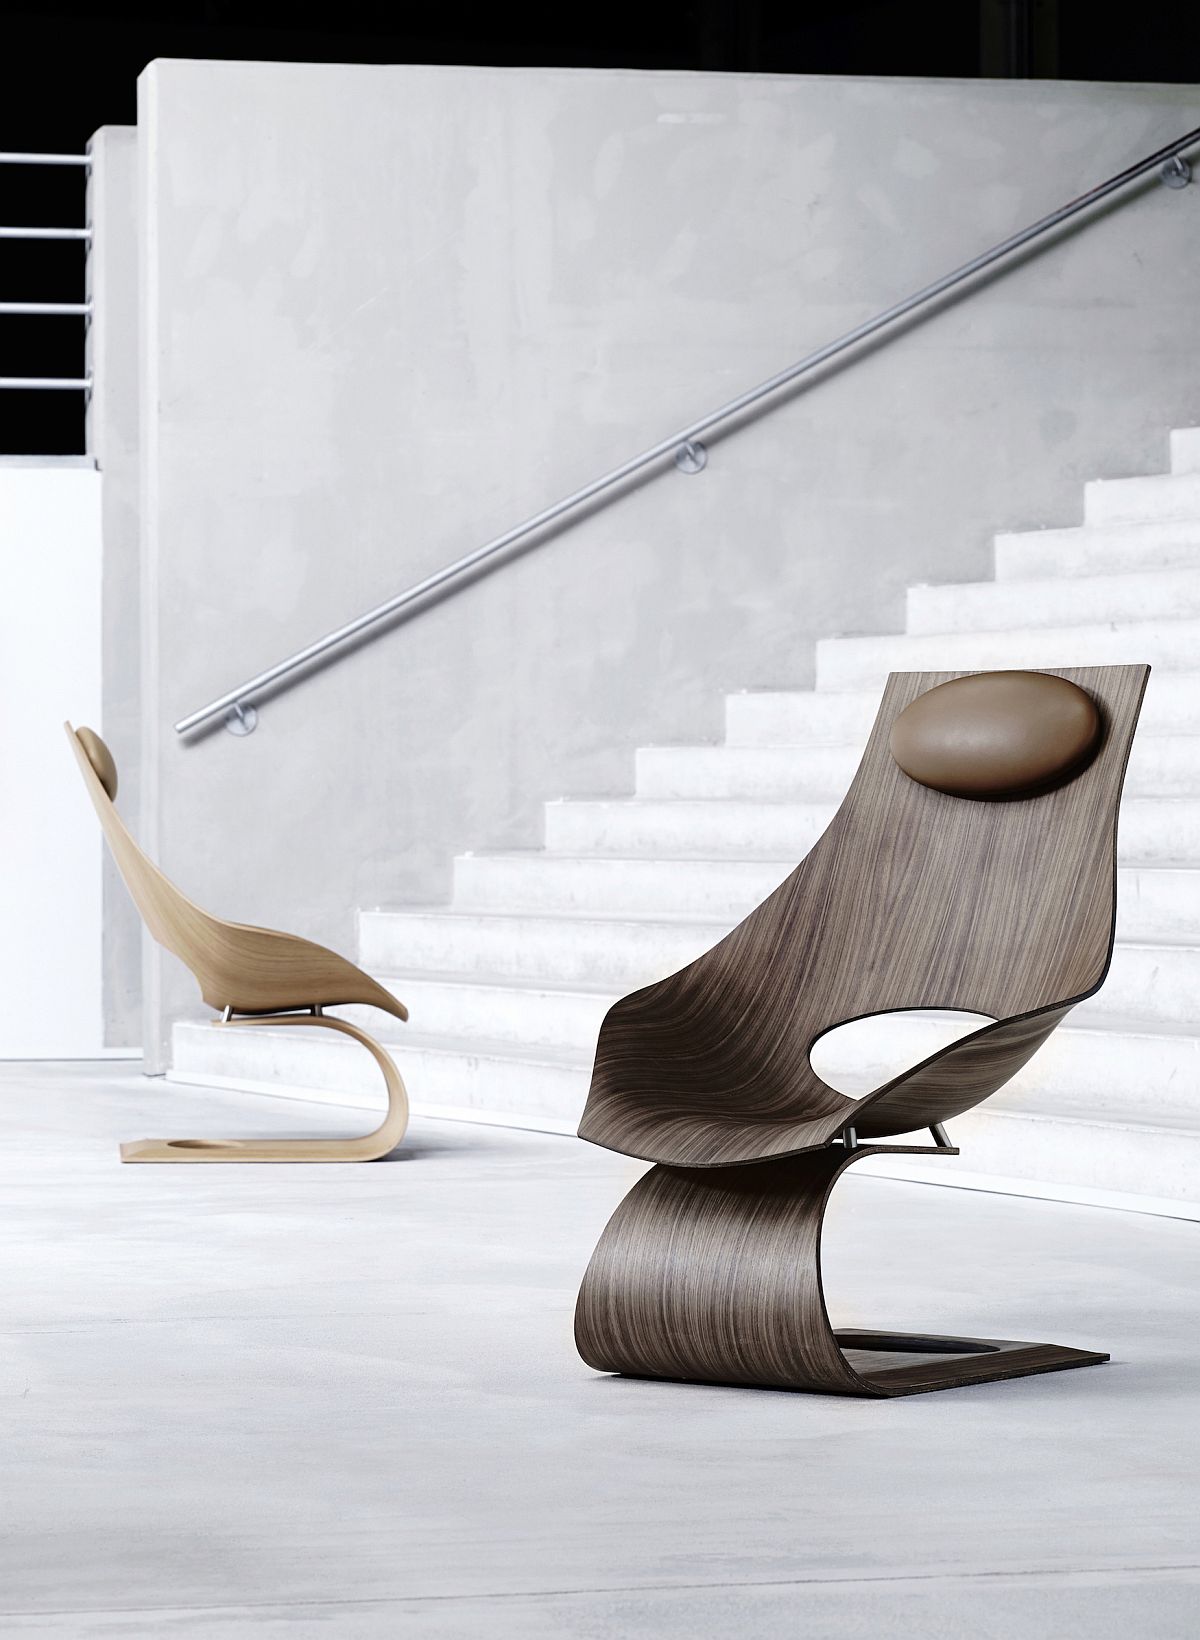 Three‐dimensional plywood is used to create the beautiful Dream Chair